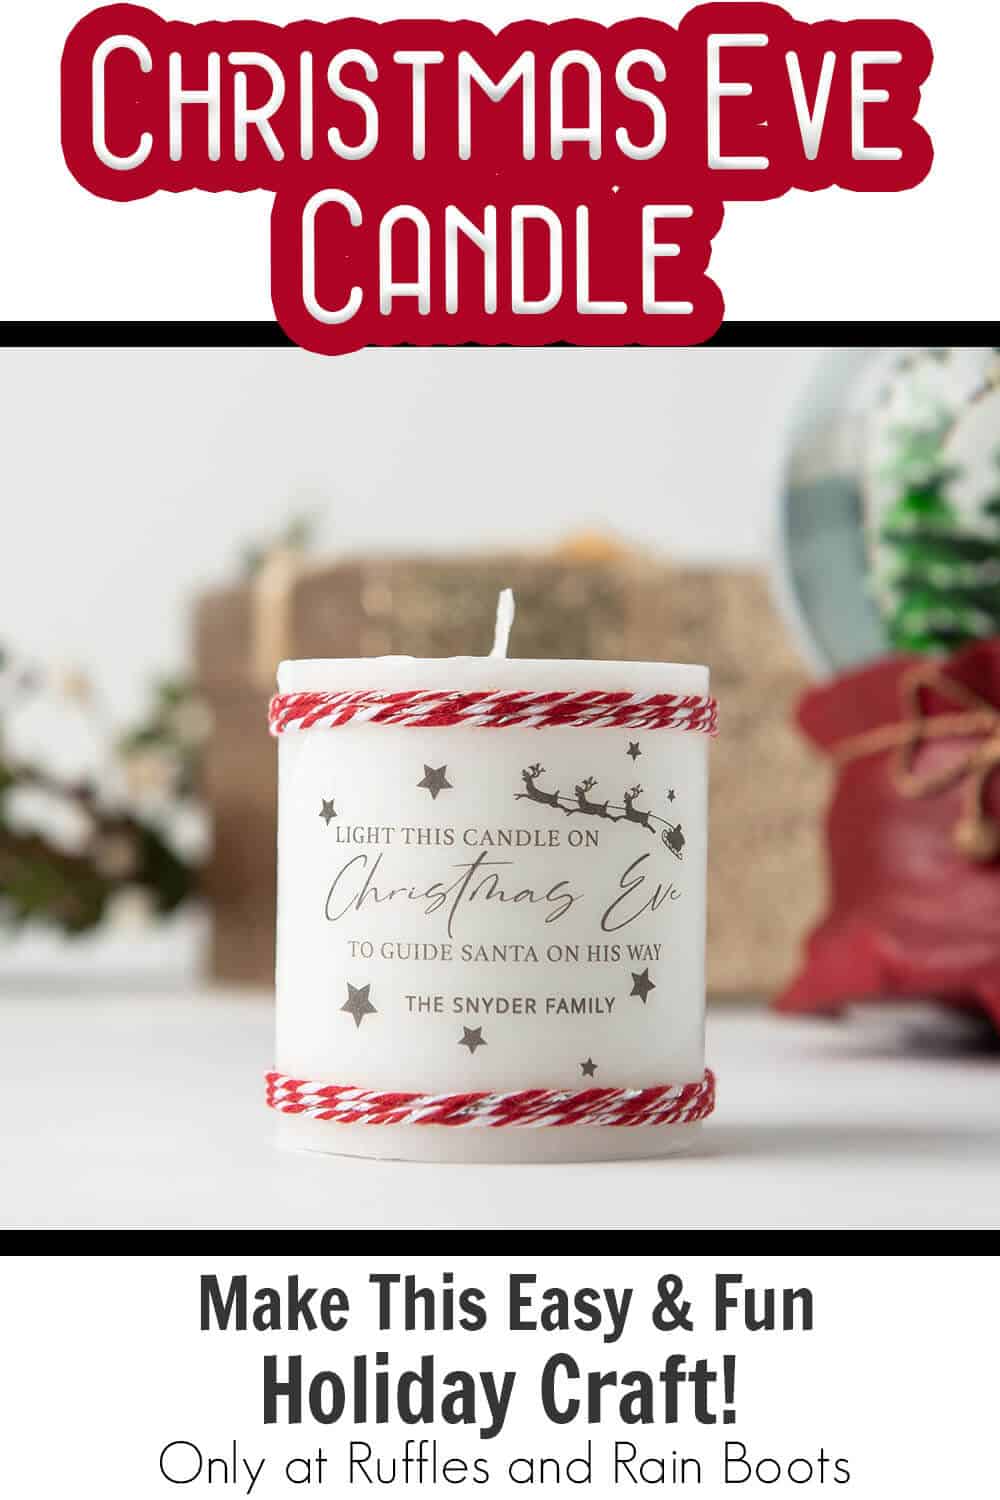 santa guide candle for christmas eve with text which reads christmas eve candle make this easy & fun holiday craft!